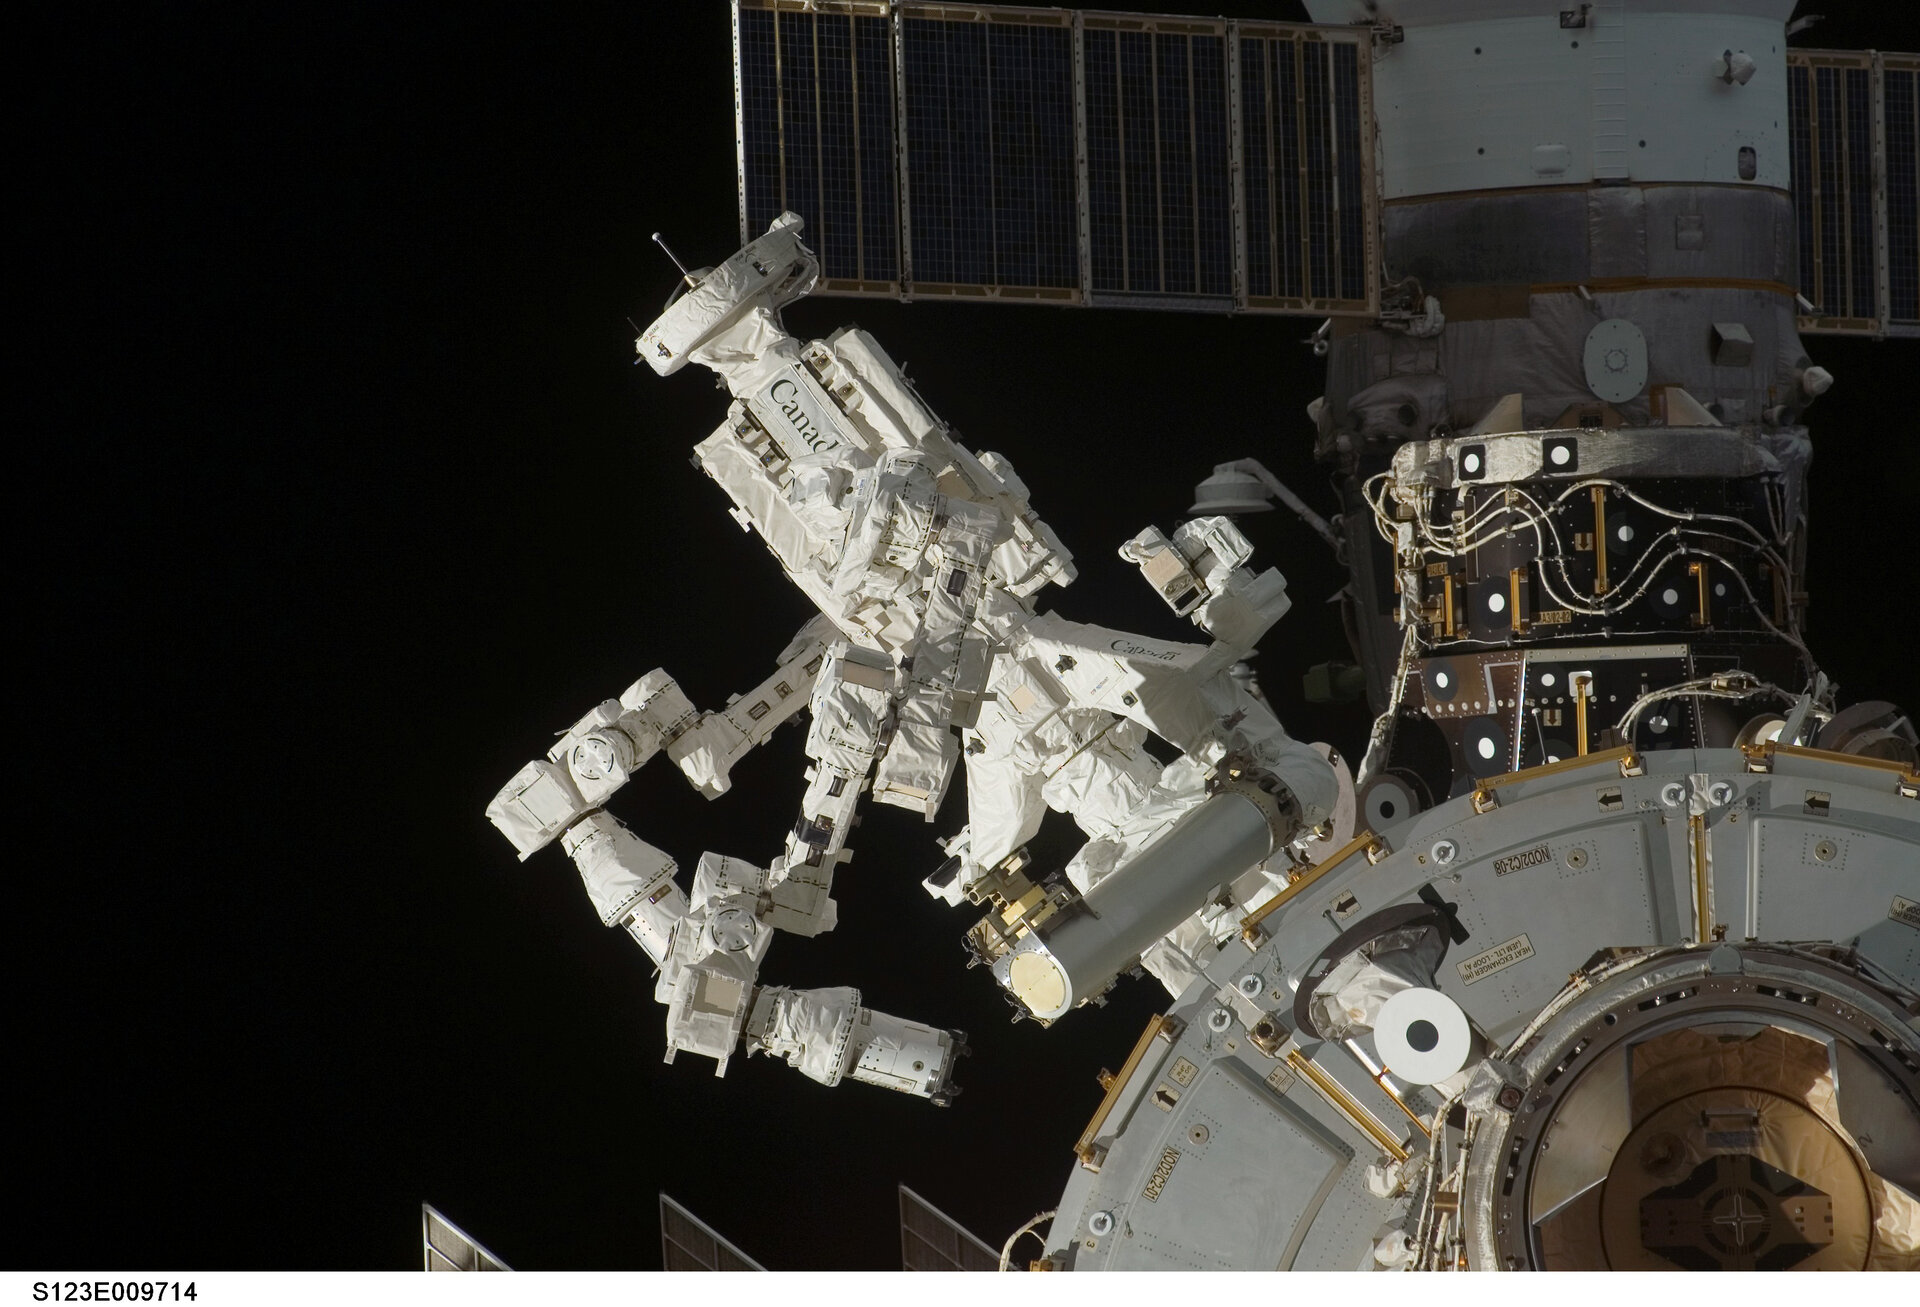 The Canadian Special Purpose Dextrous Manipulator, Dextre, installed on exterior of ISS